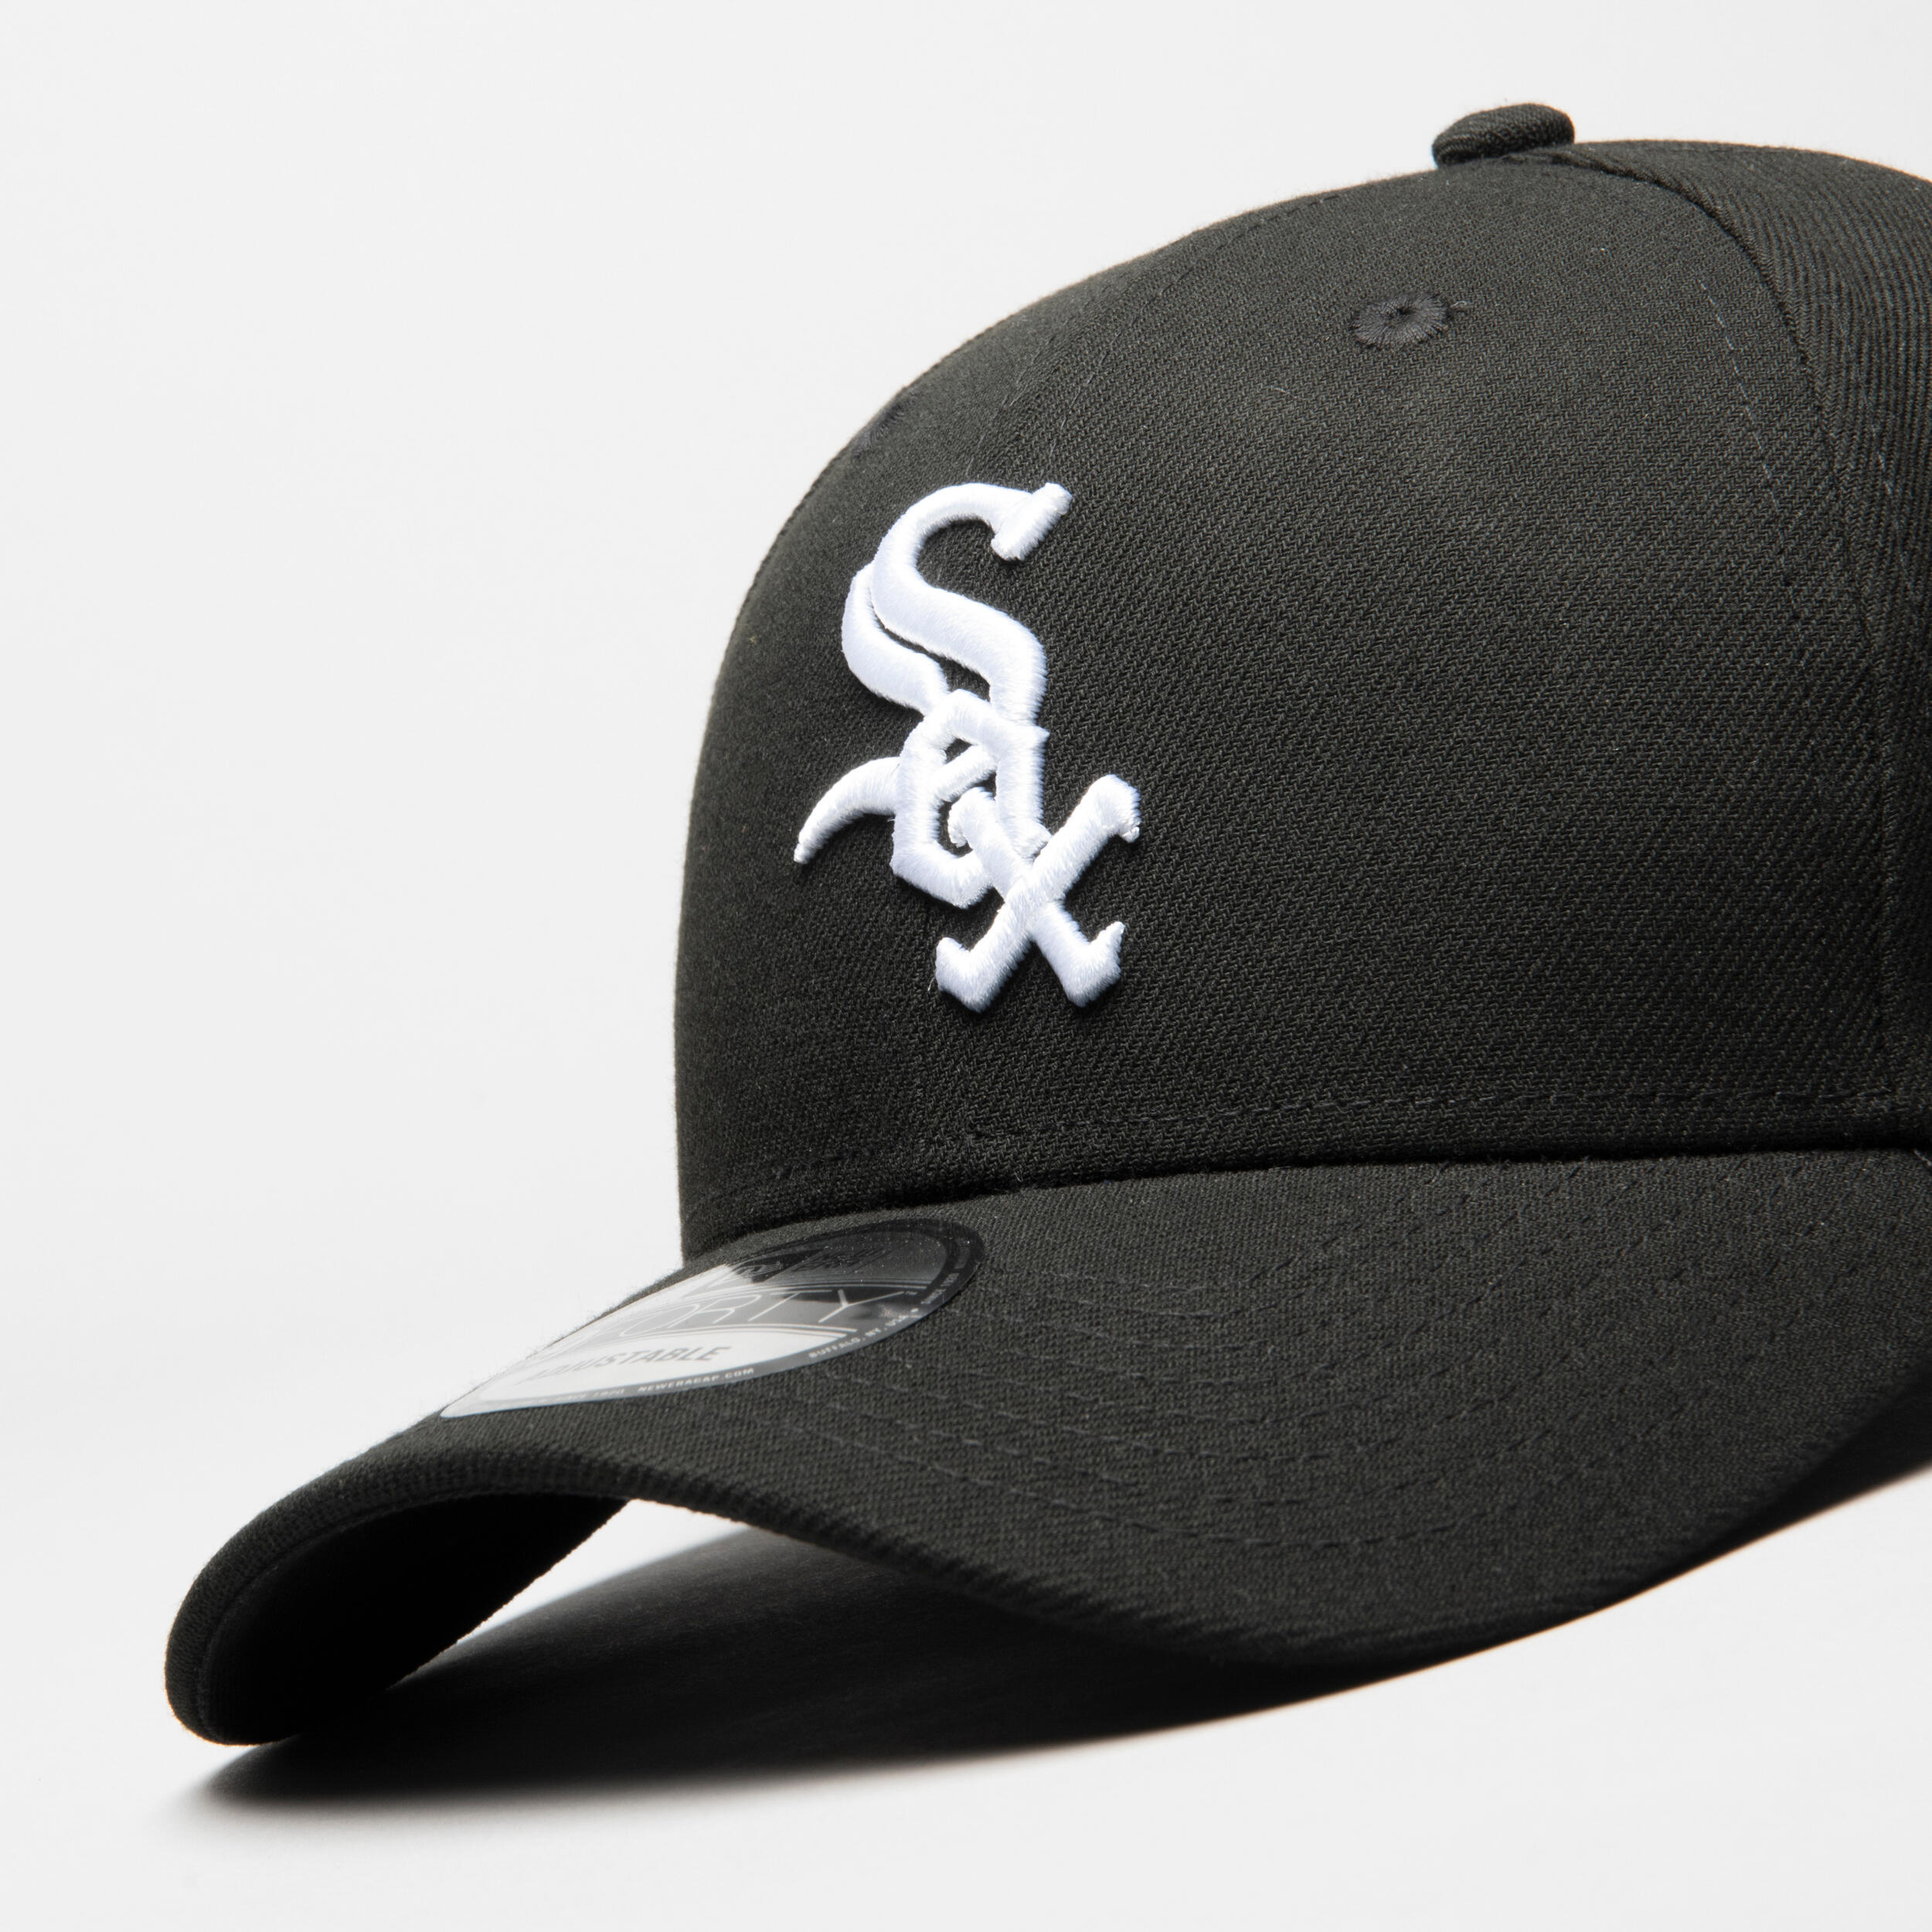 Check out the new White Sox hats designed by Chance the Rapper  MLBcom